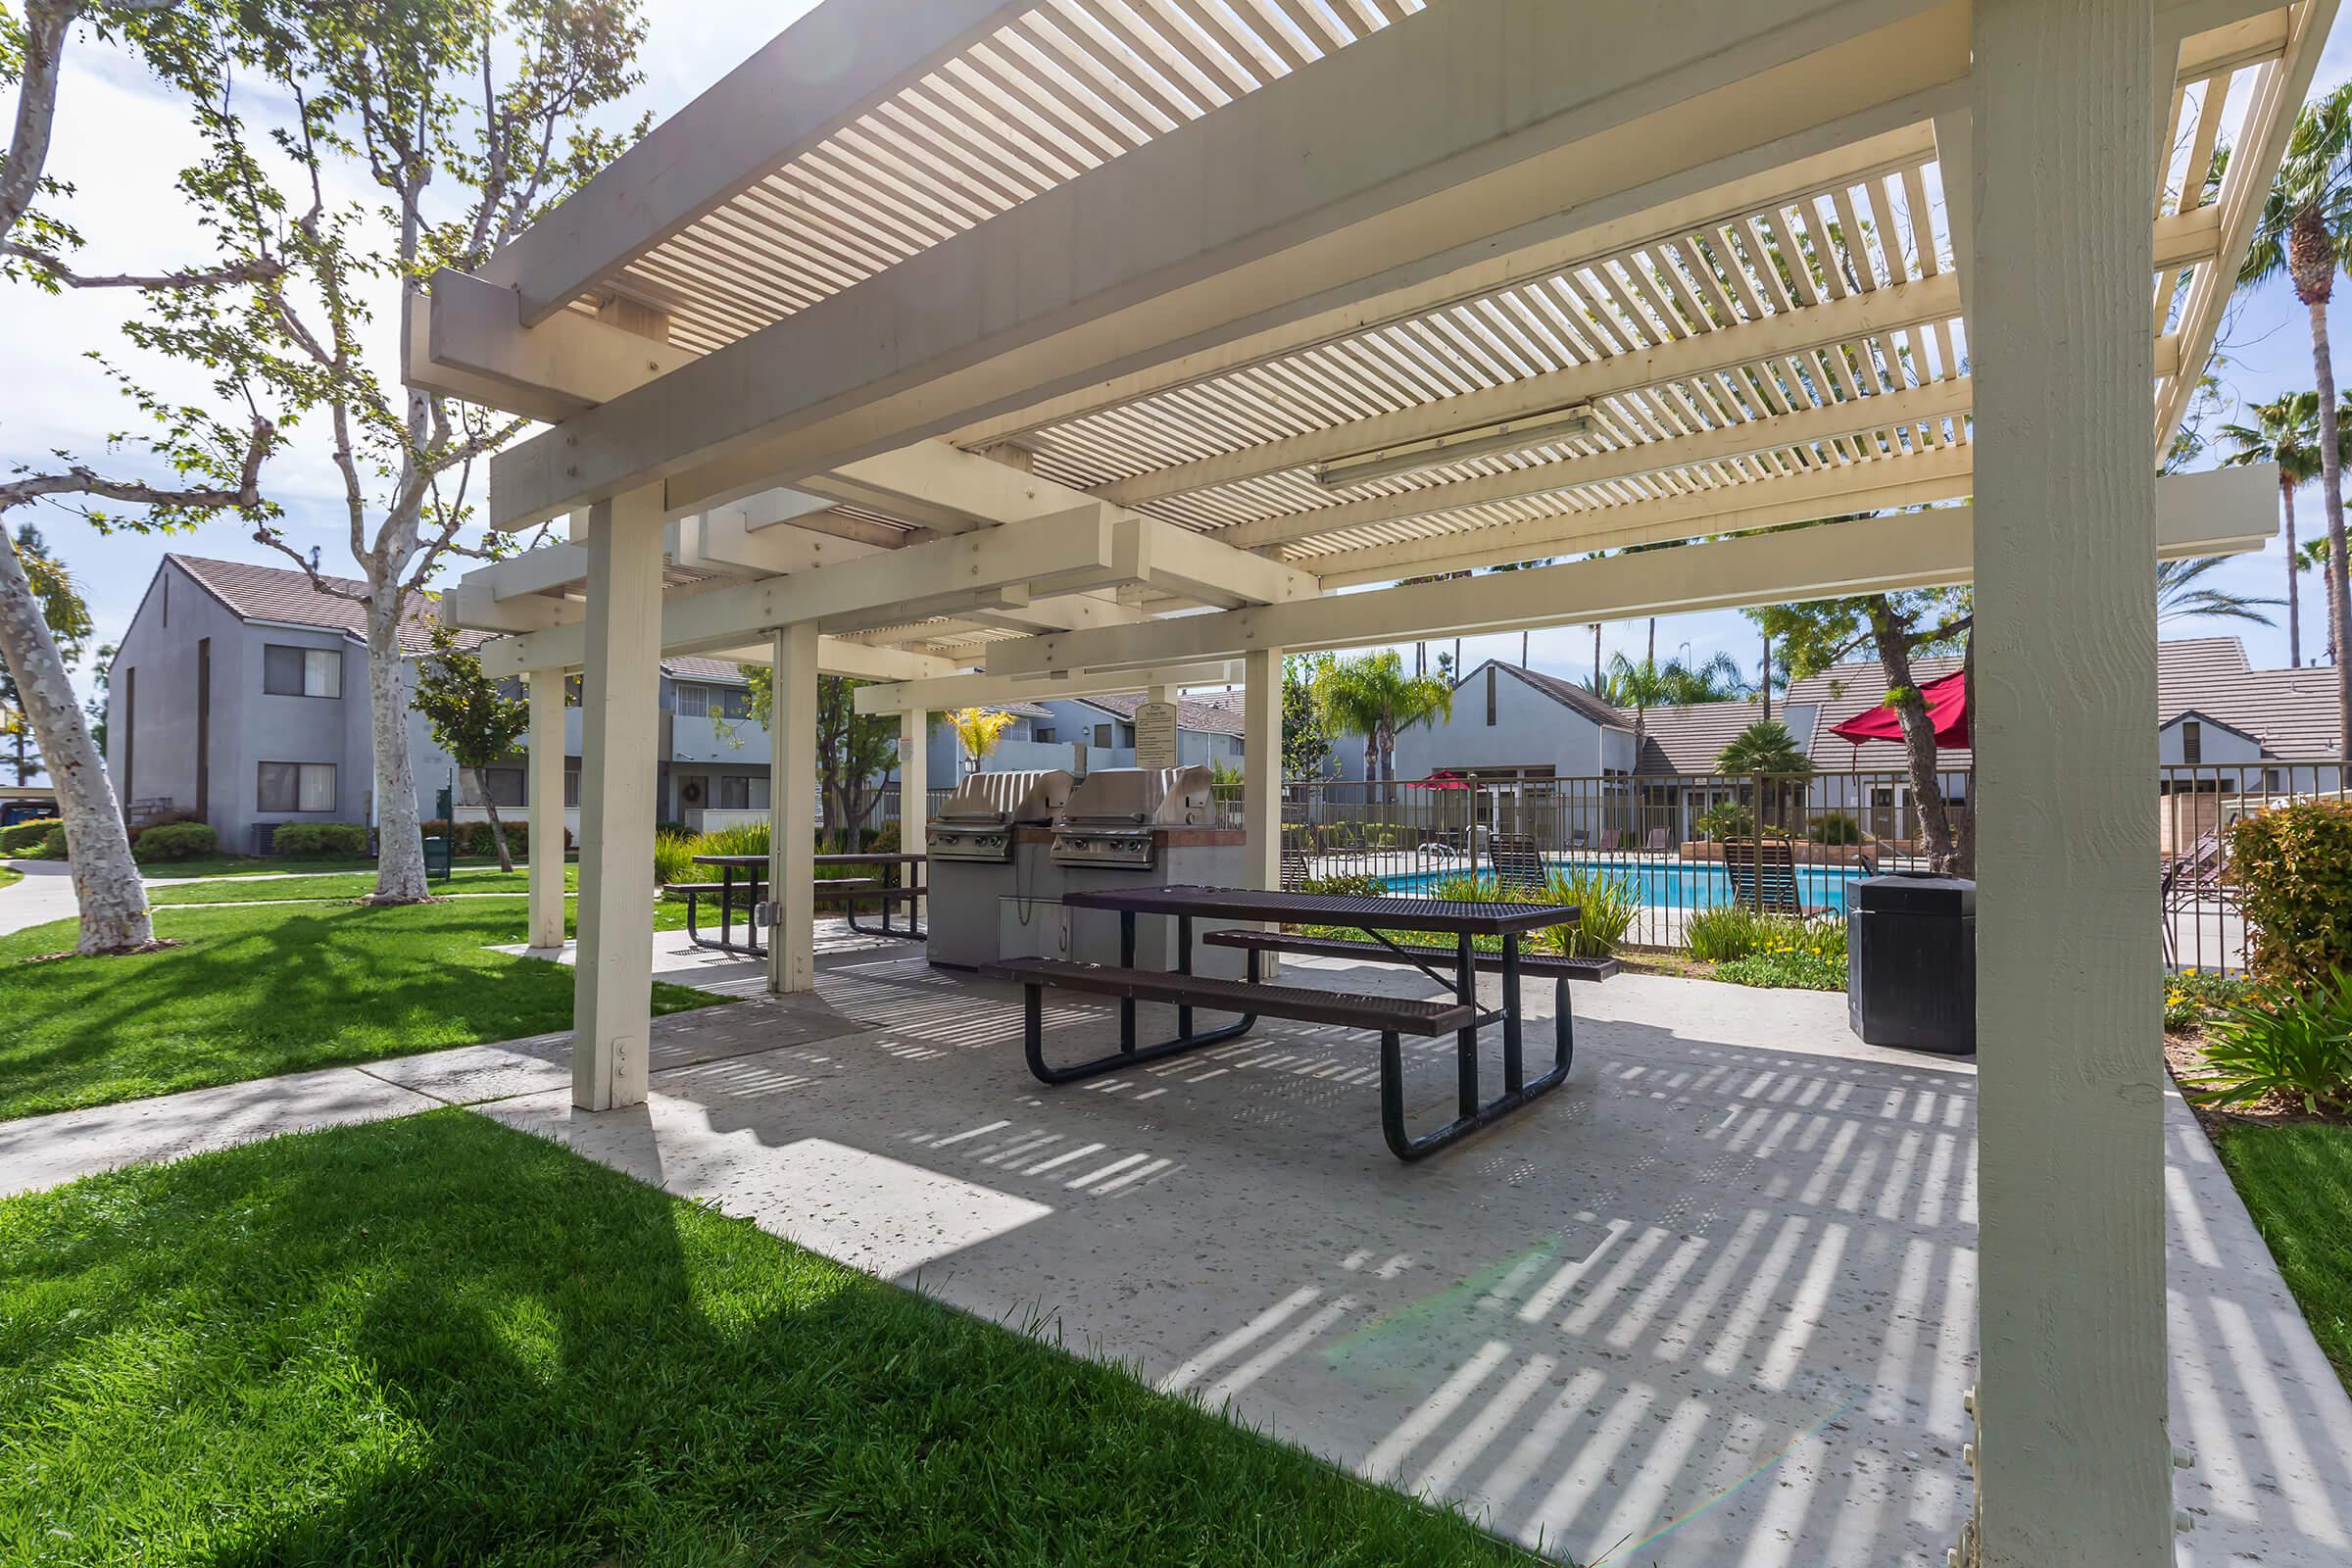 Picnic tables and barbecues under a pergola